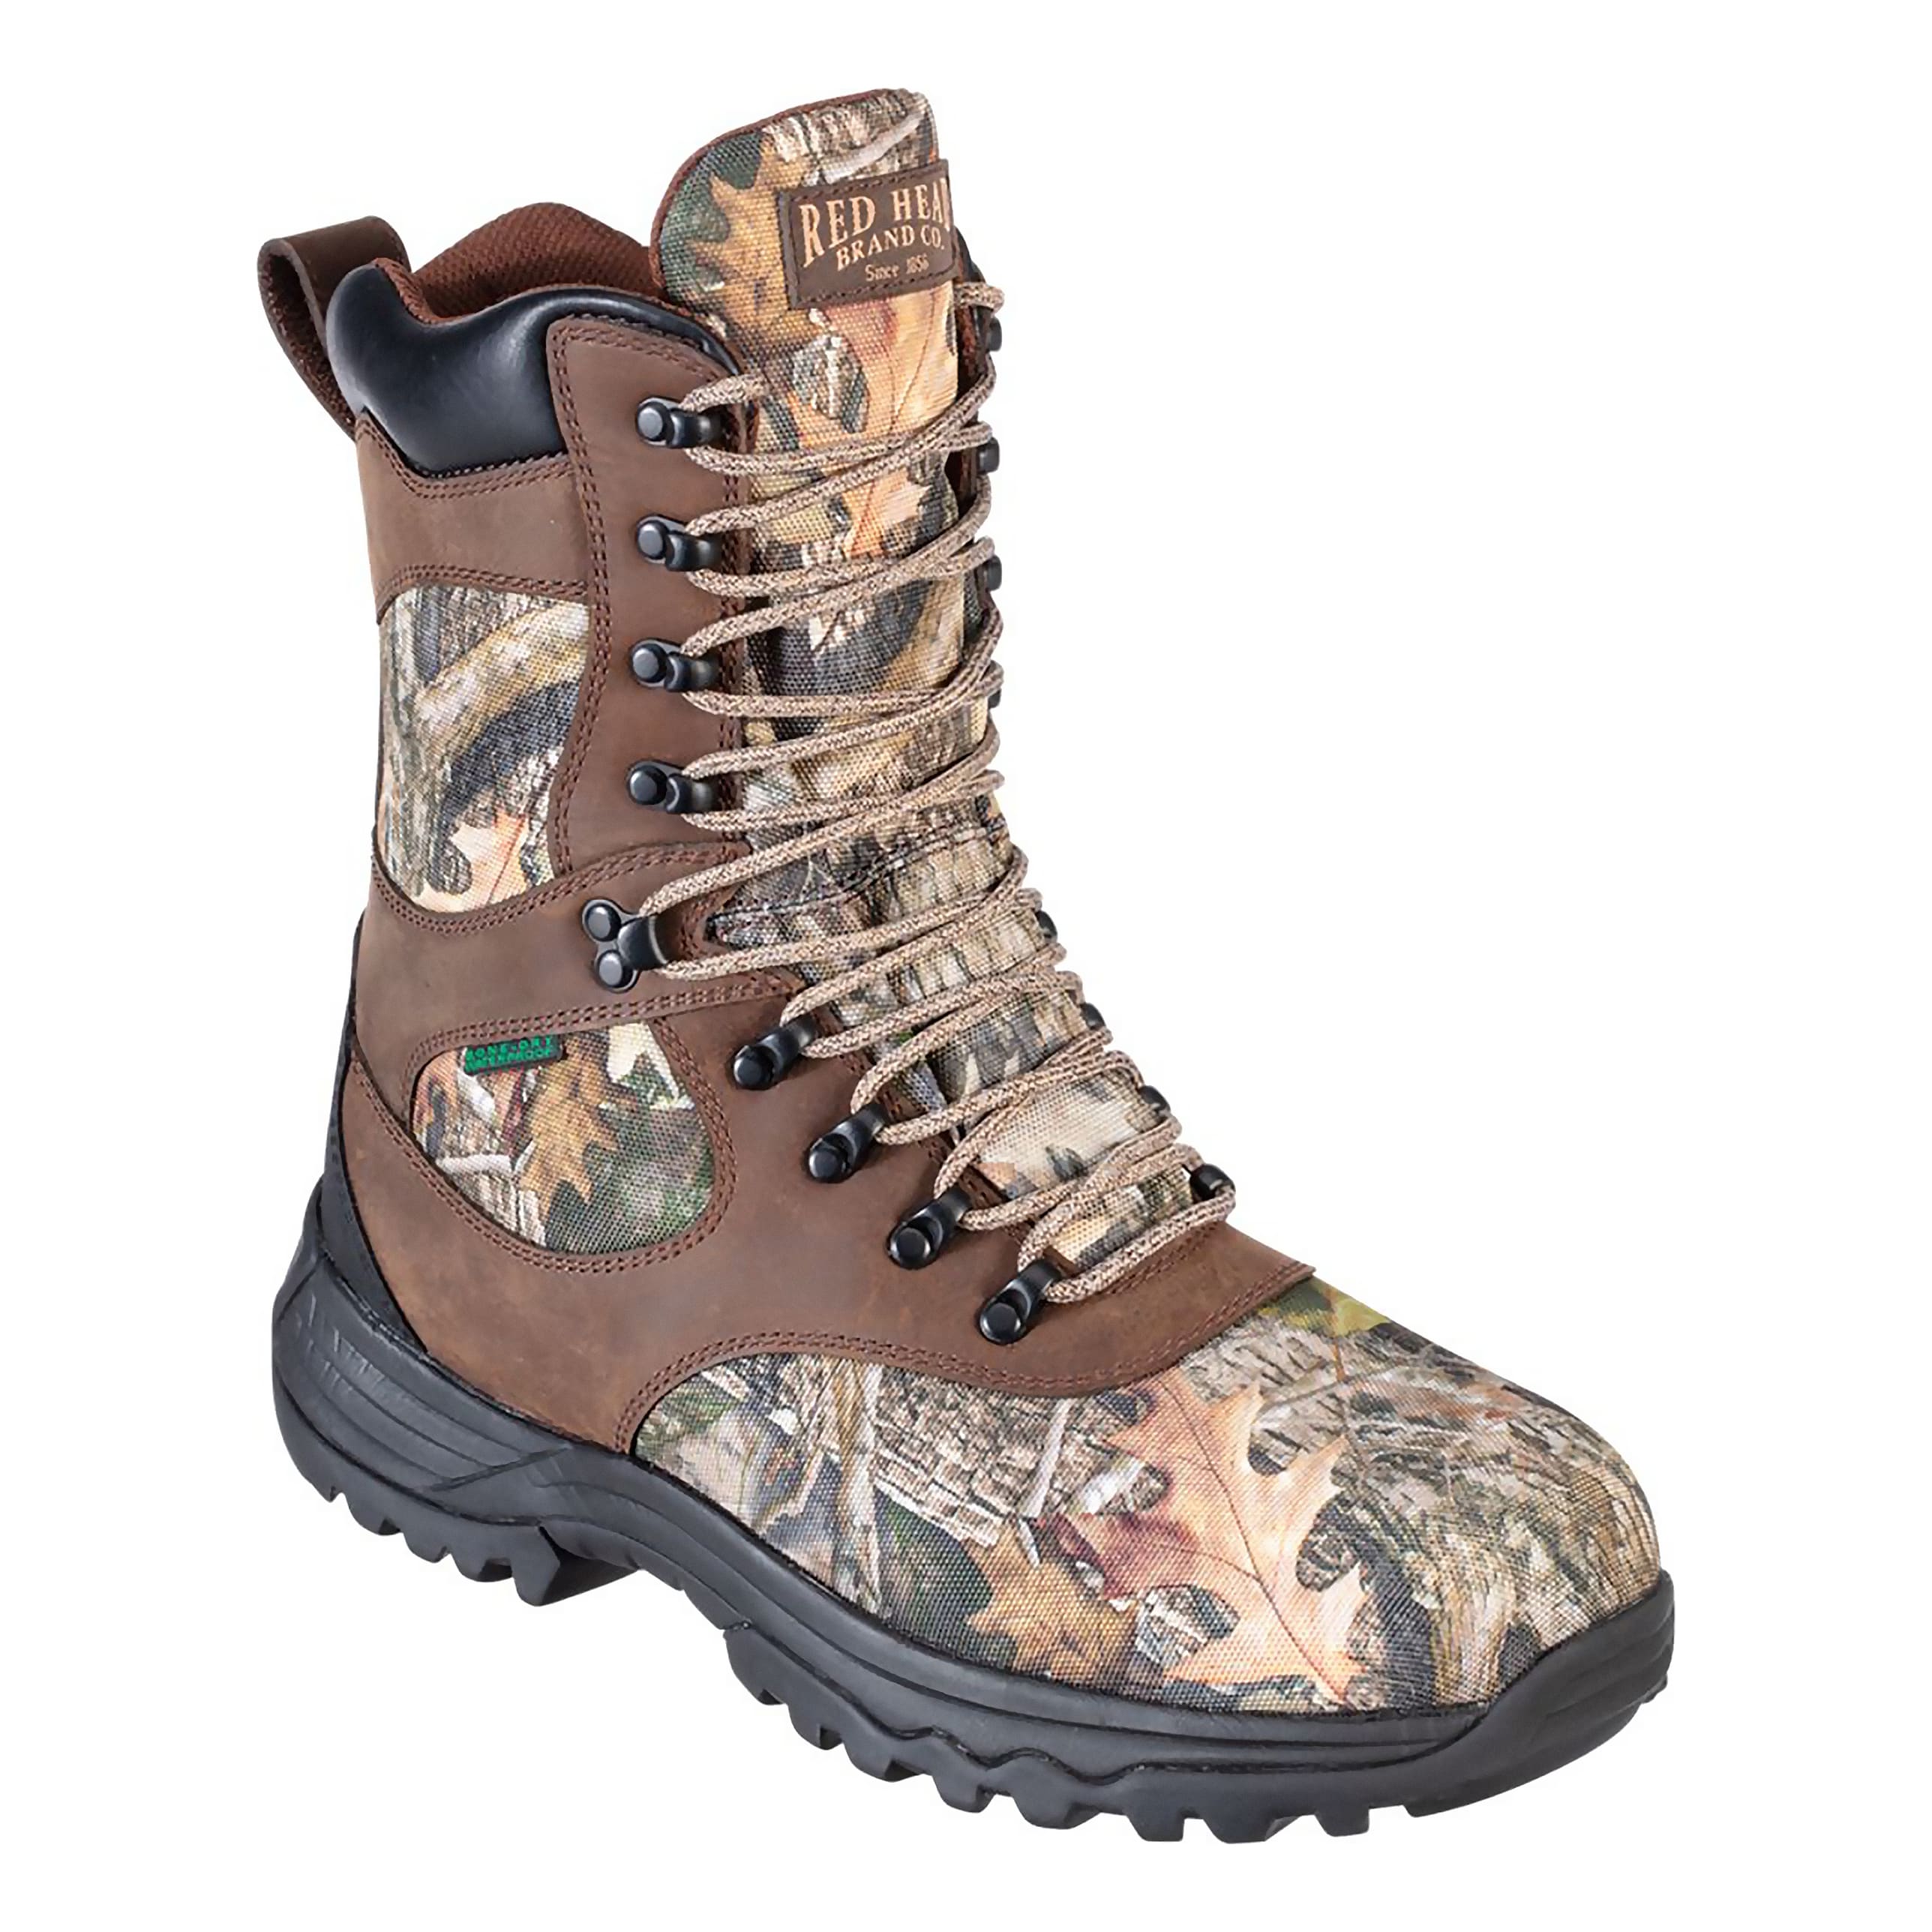 RedHead® Men’s Expedition Ultra BONE-DRY® Insulated Waterproof Hunting Boots